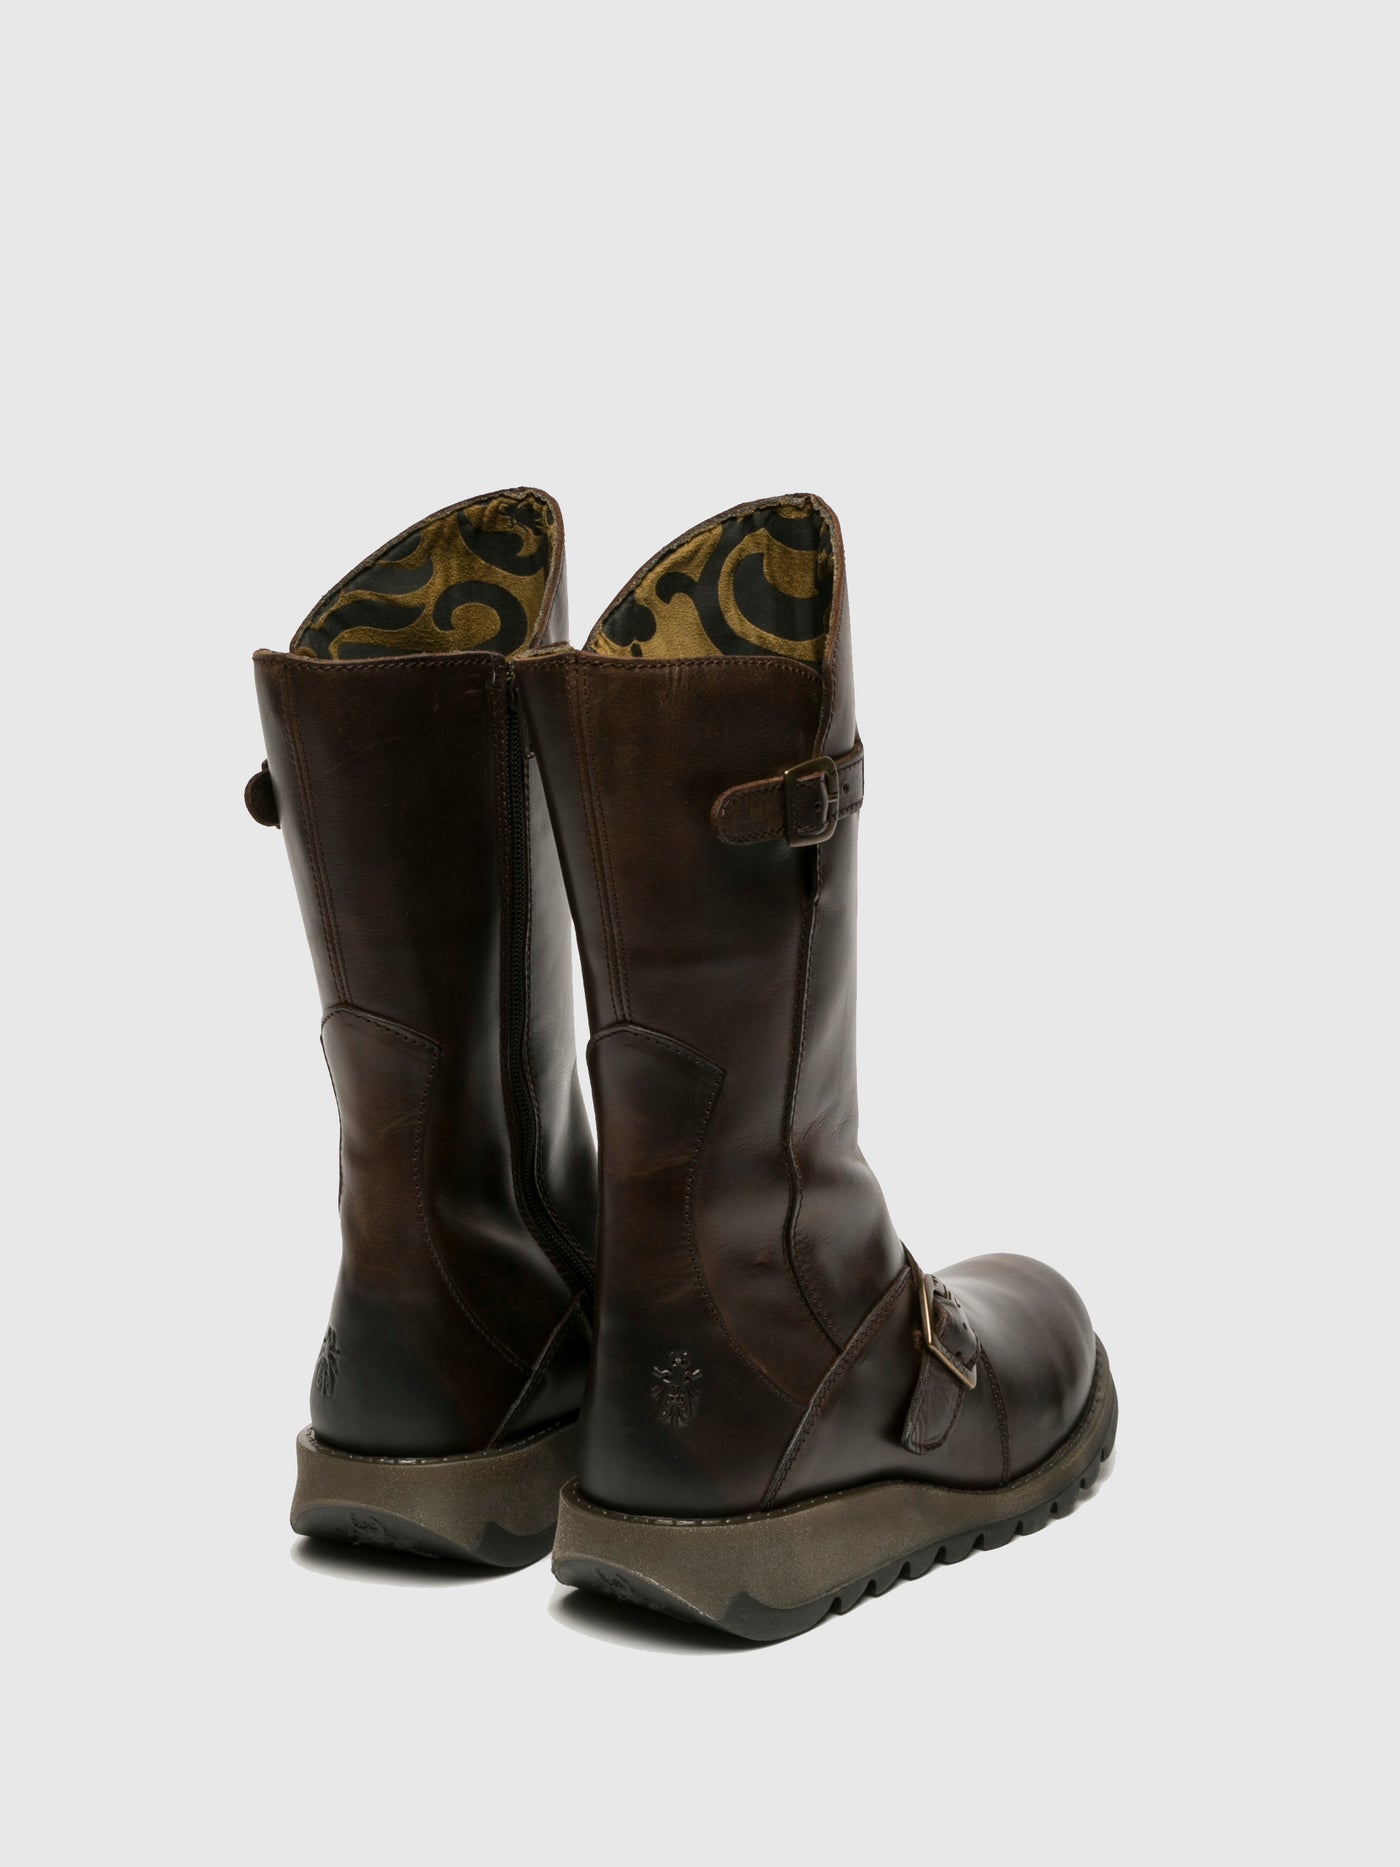 Buckle Boots MES 2 DK BROWN